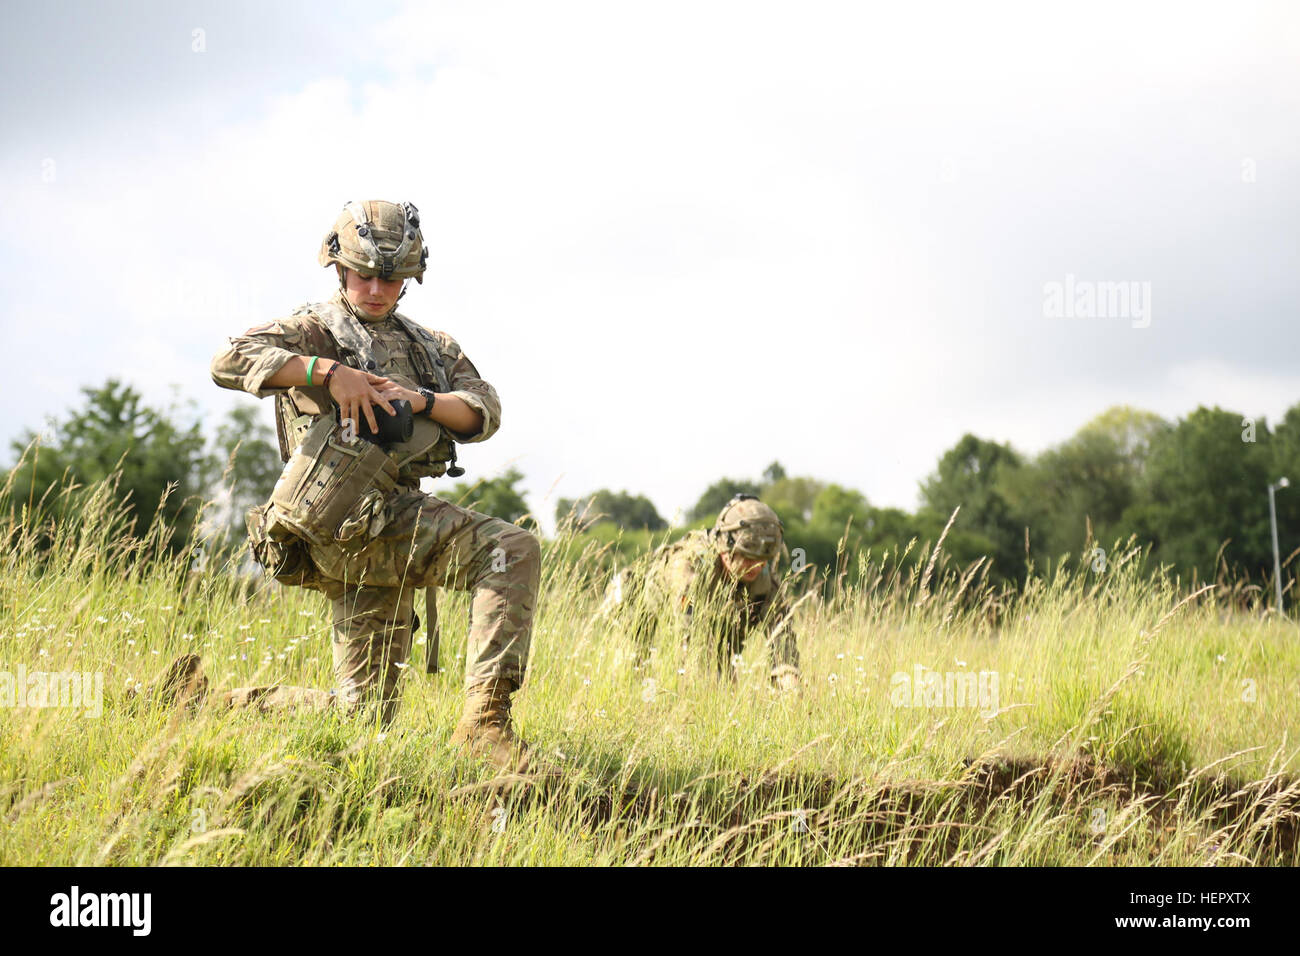 A British soldier of Airborne Combined Joint Expeditionary Force secures his productive mask while conducting tactical operations during Swift Response 16 training exercise at the Hohenfels Training Area, a part of the Joint Multinational Readiness Center, in Hohenfels, Germany, Jun. 22, 2016. Exercise Swift Response is one of the premier military crisis response training events for multi-national airborne forces in the world. The exercise is designed to enhance the readiness of the combat core of the U.S. Global Response Force – currently the 82nd Airborne Division’s 1st Brigade Combat Team – Stock Photo